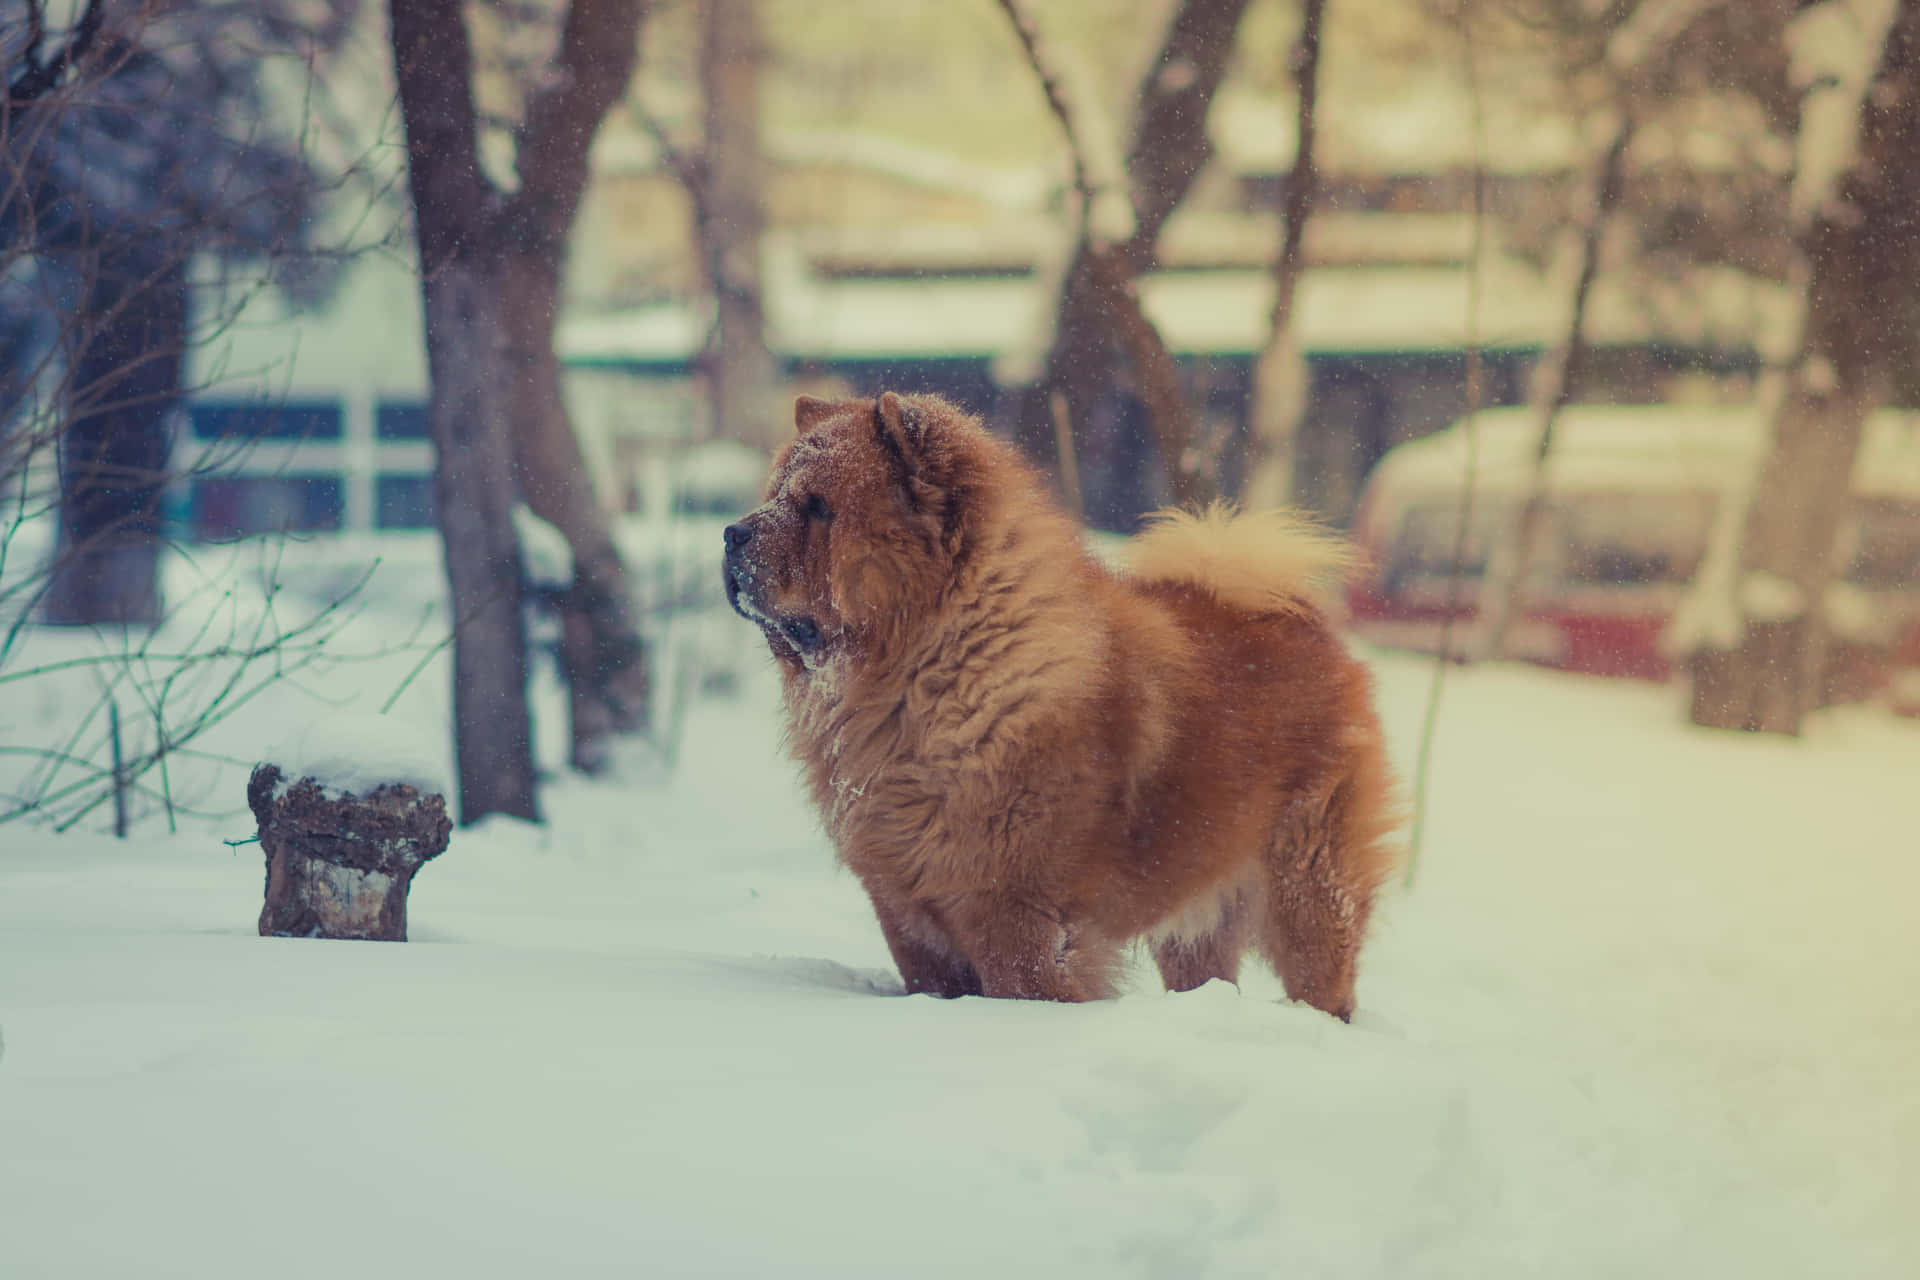 "Abreast of the Times: Adorable Chow Chow"